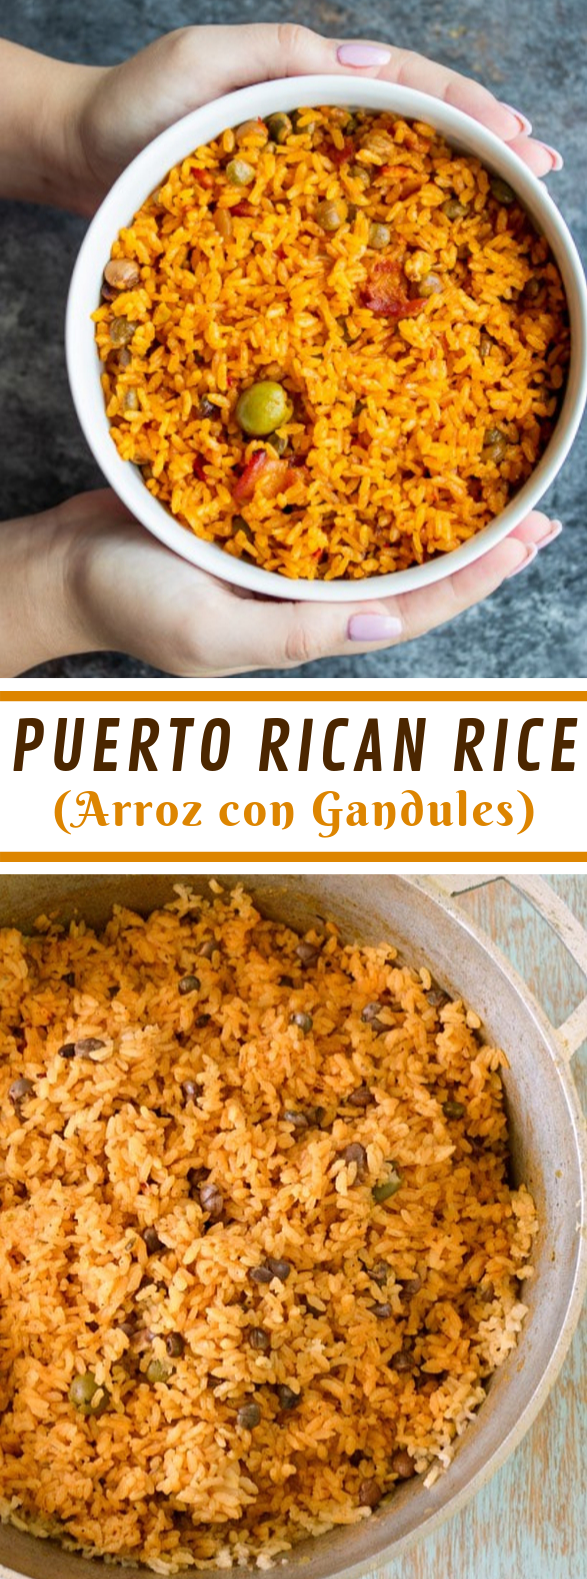 PUERTO RICAN RICE #dinner #lunch